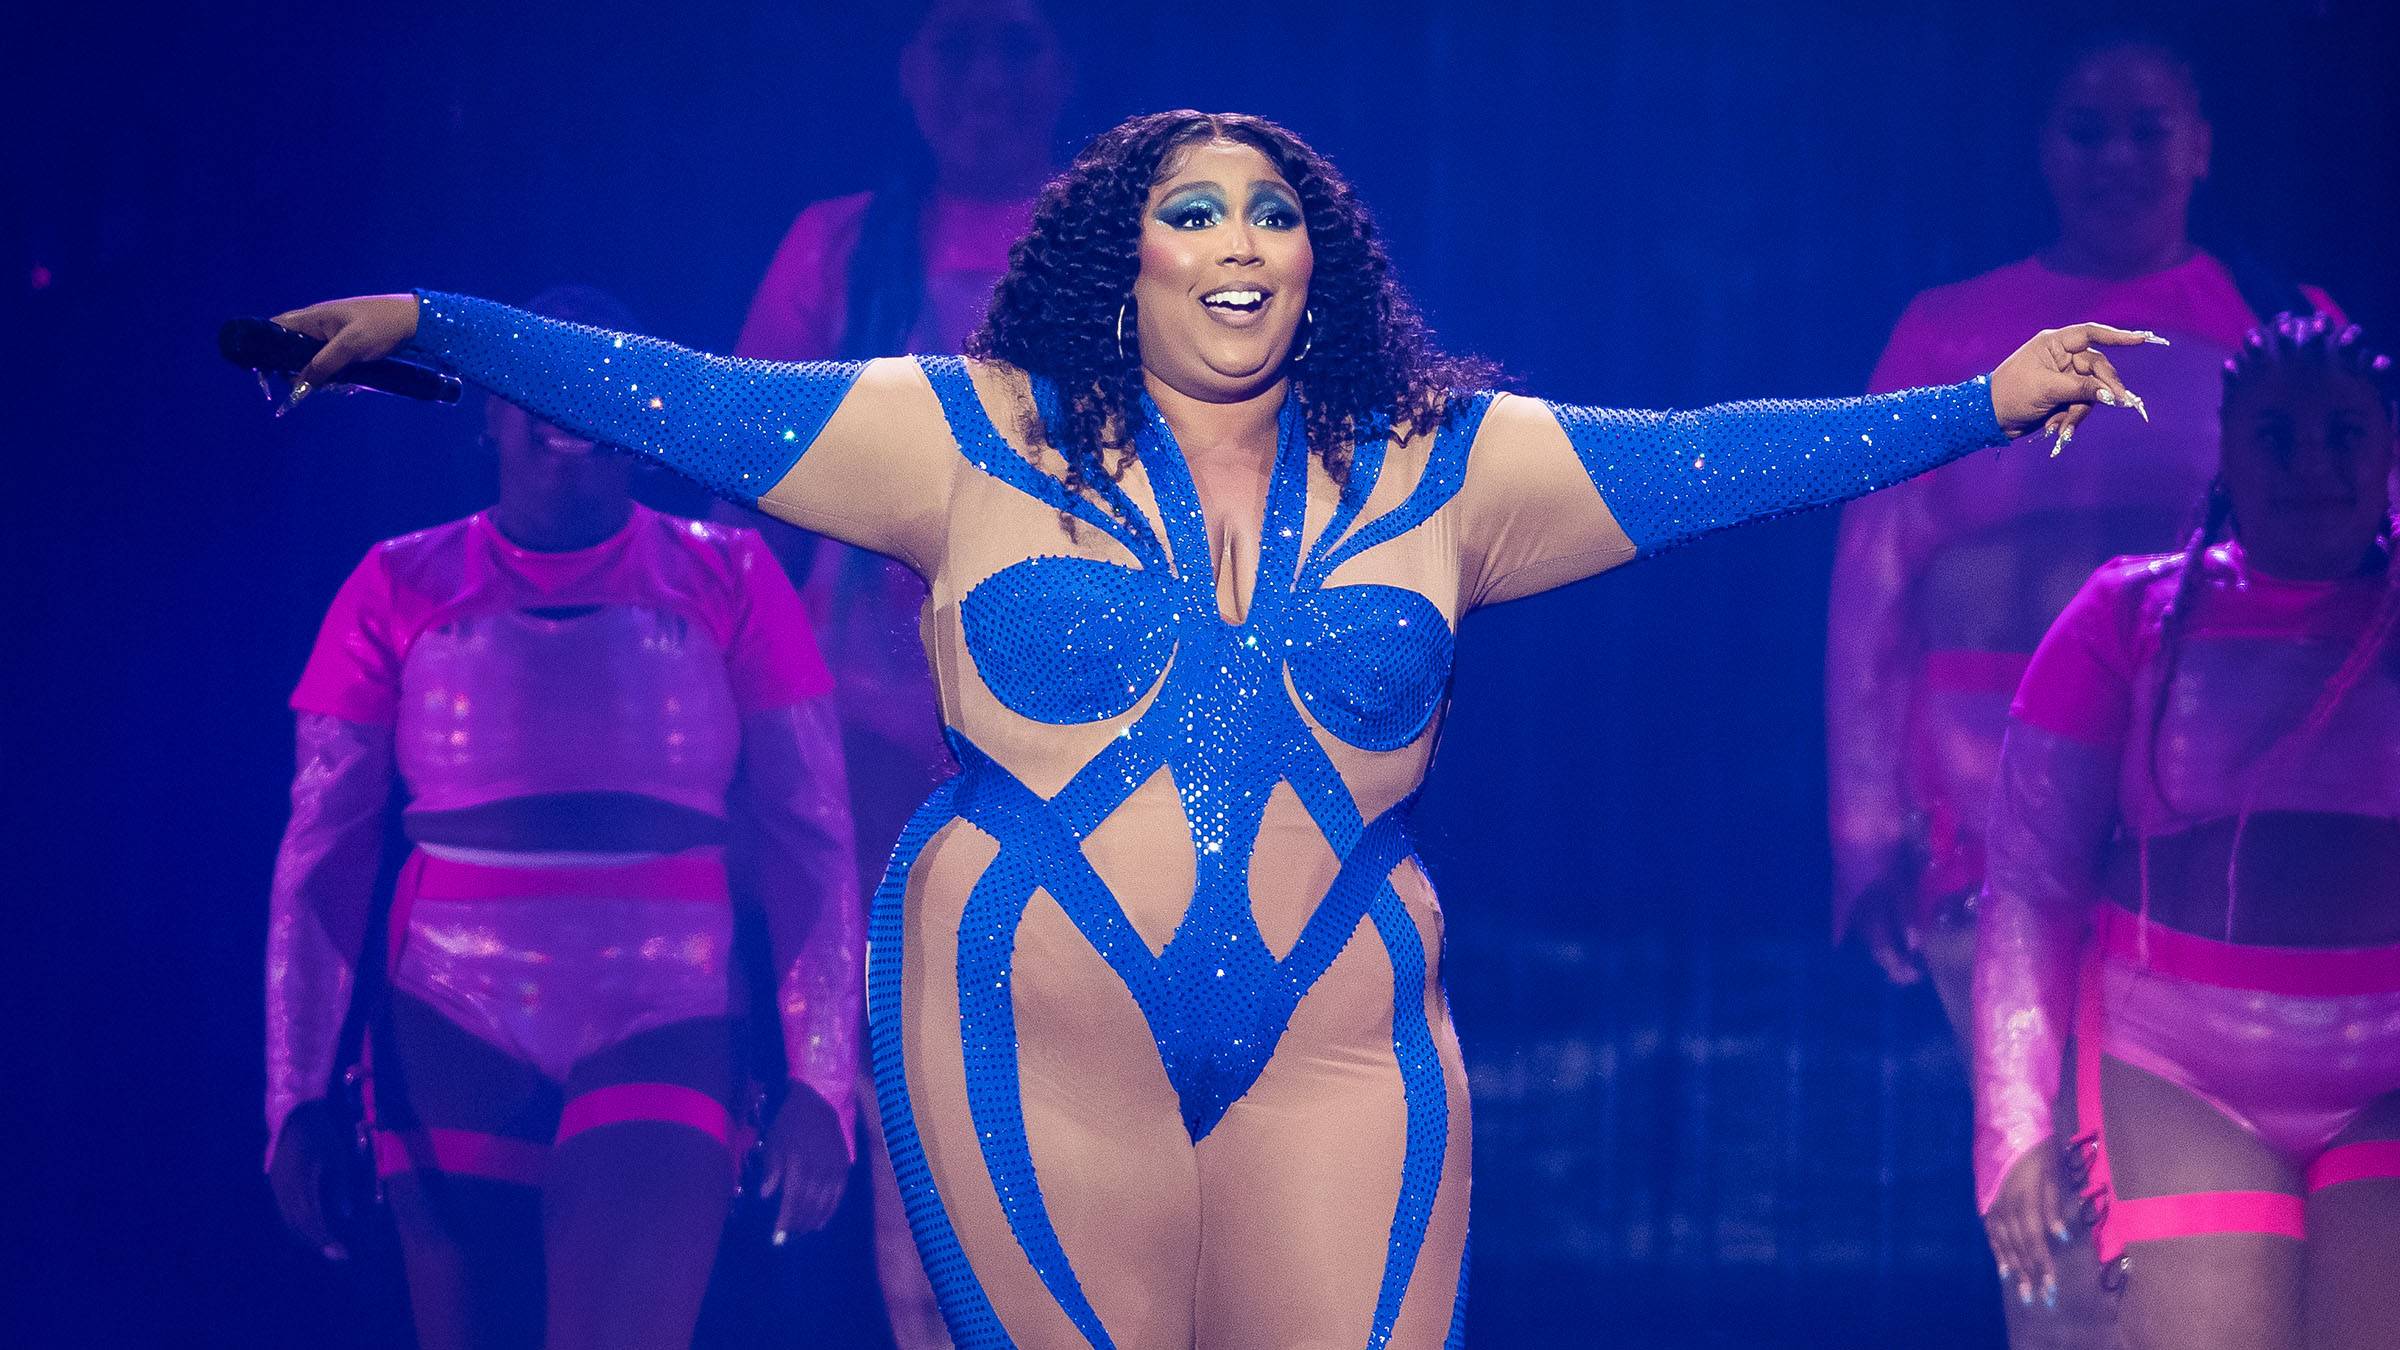 Lizzo is a vision in lavender at her first-ever Brazilian performance at  the  Space in Rio